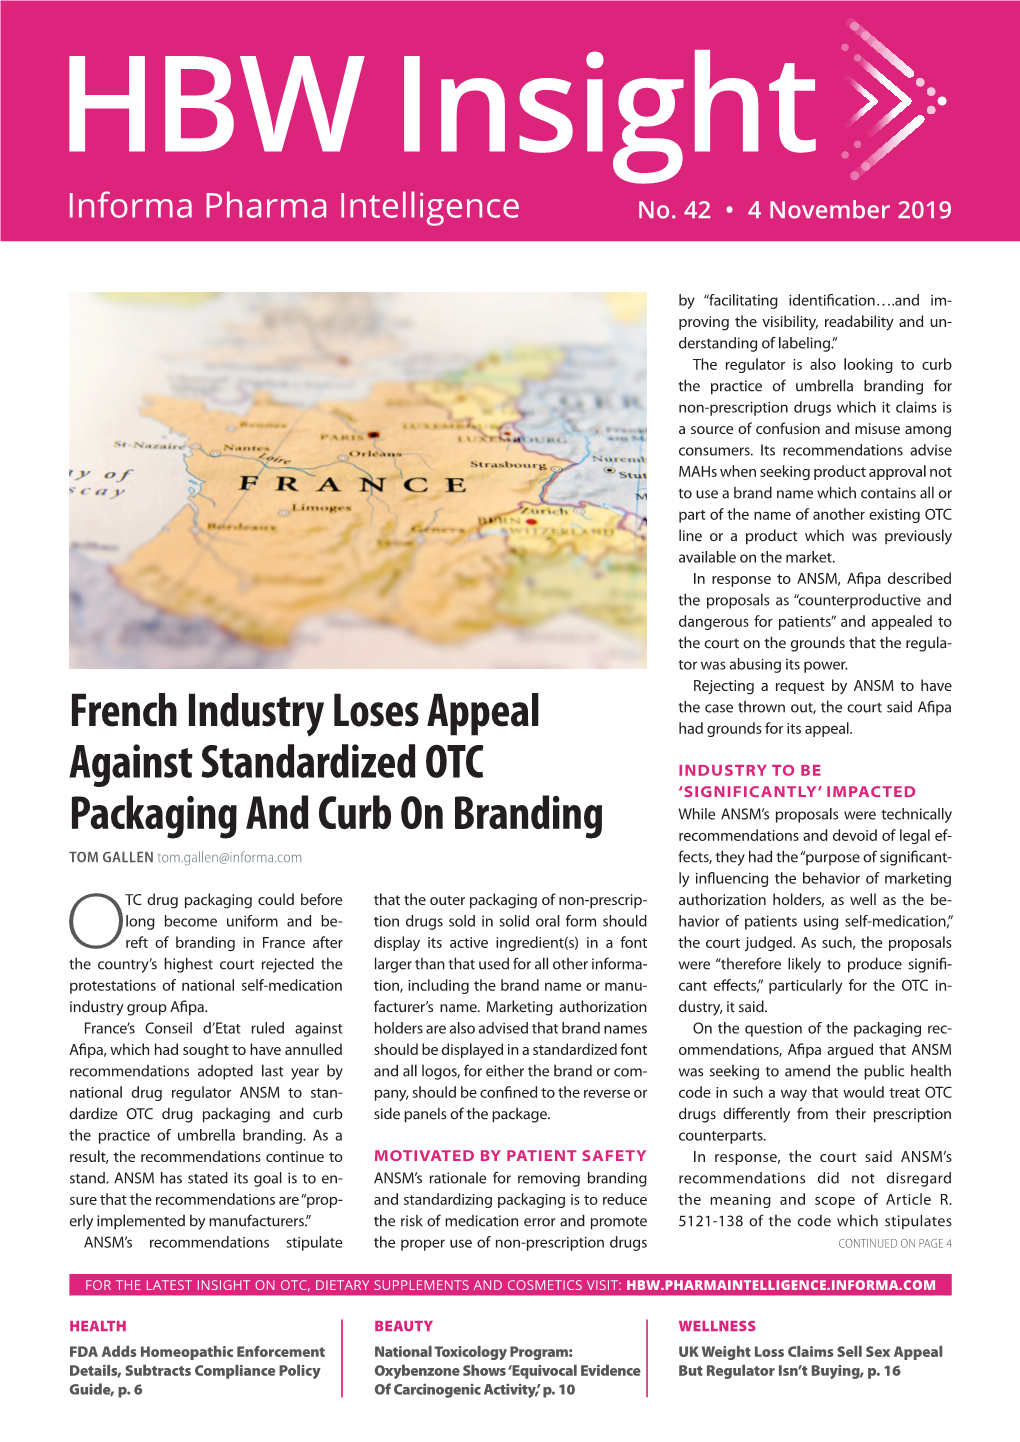 French Industry Loses Appeal Against Standardized OTC Packaging And